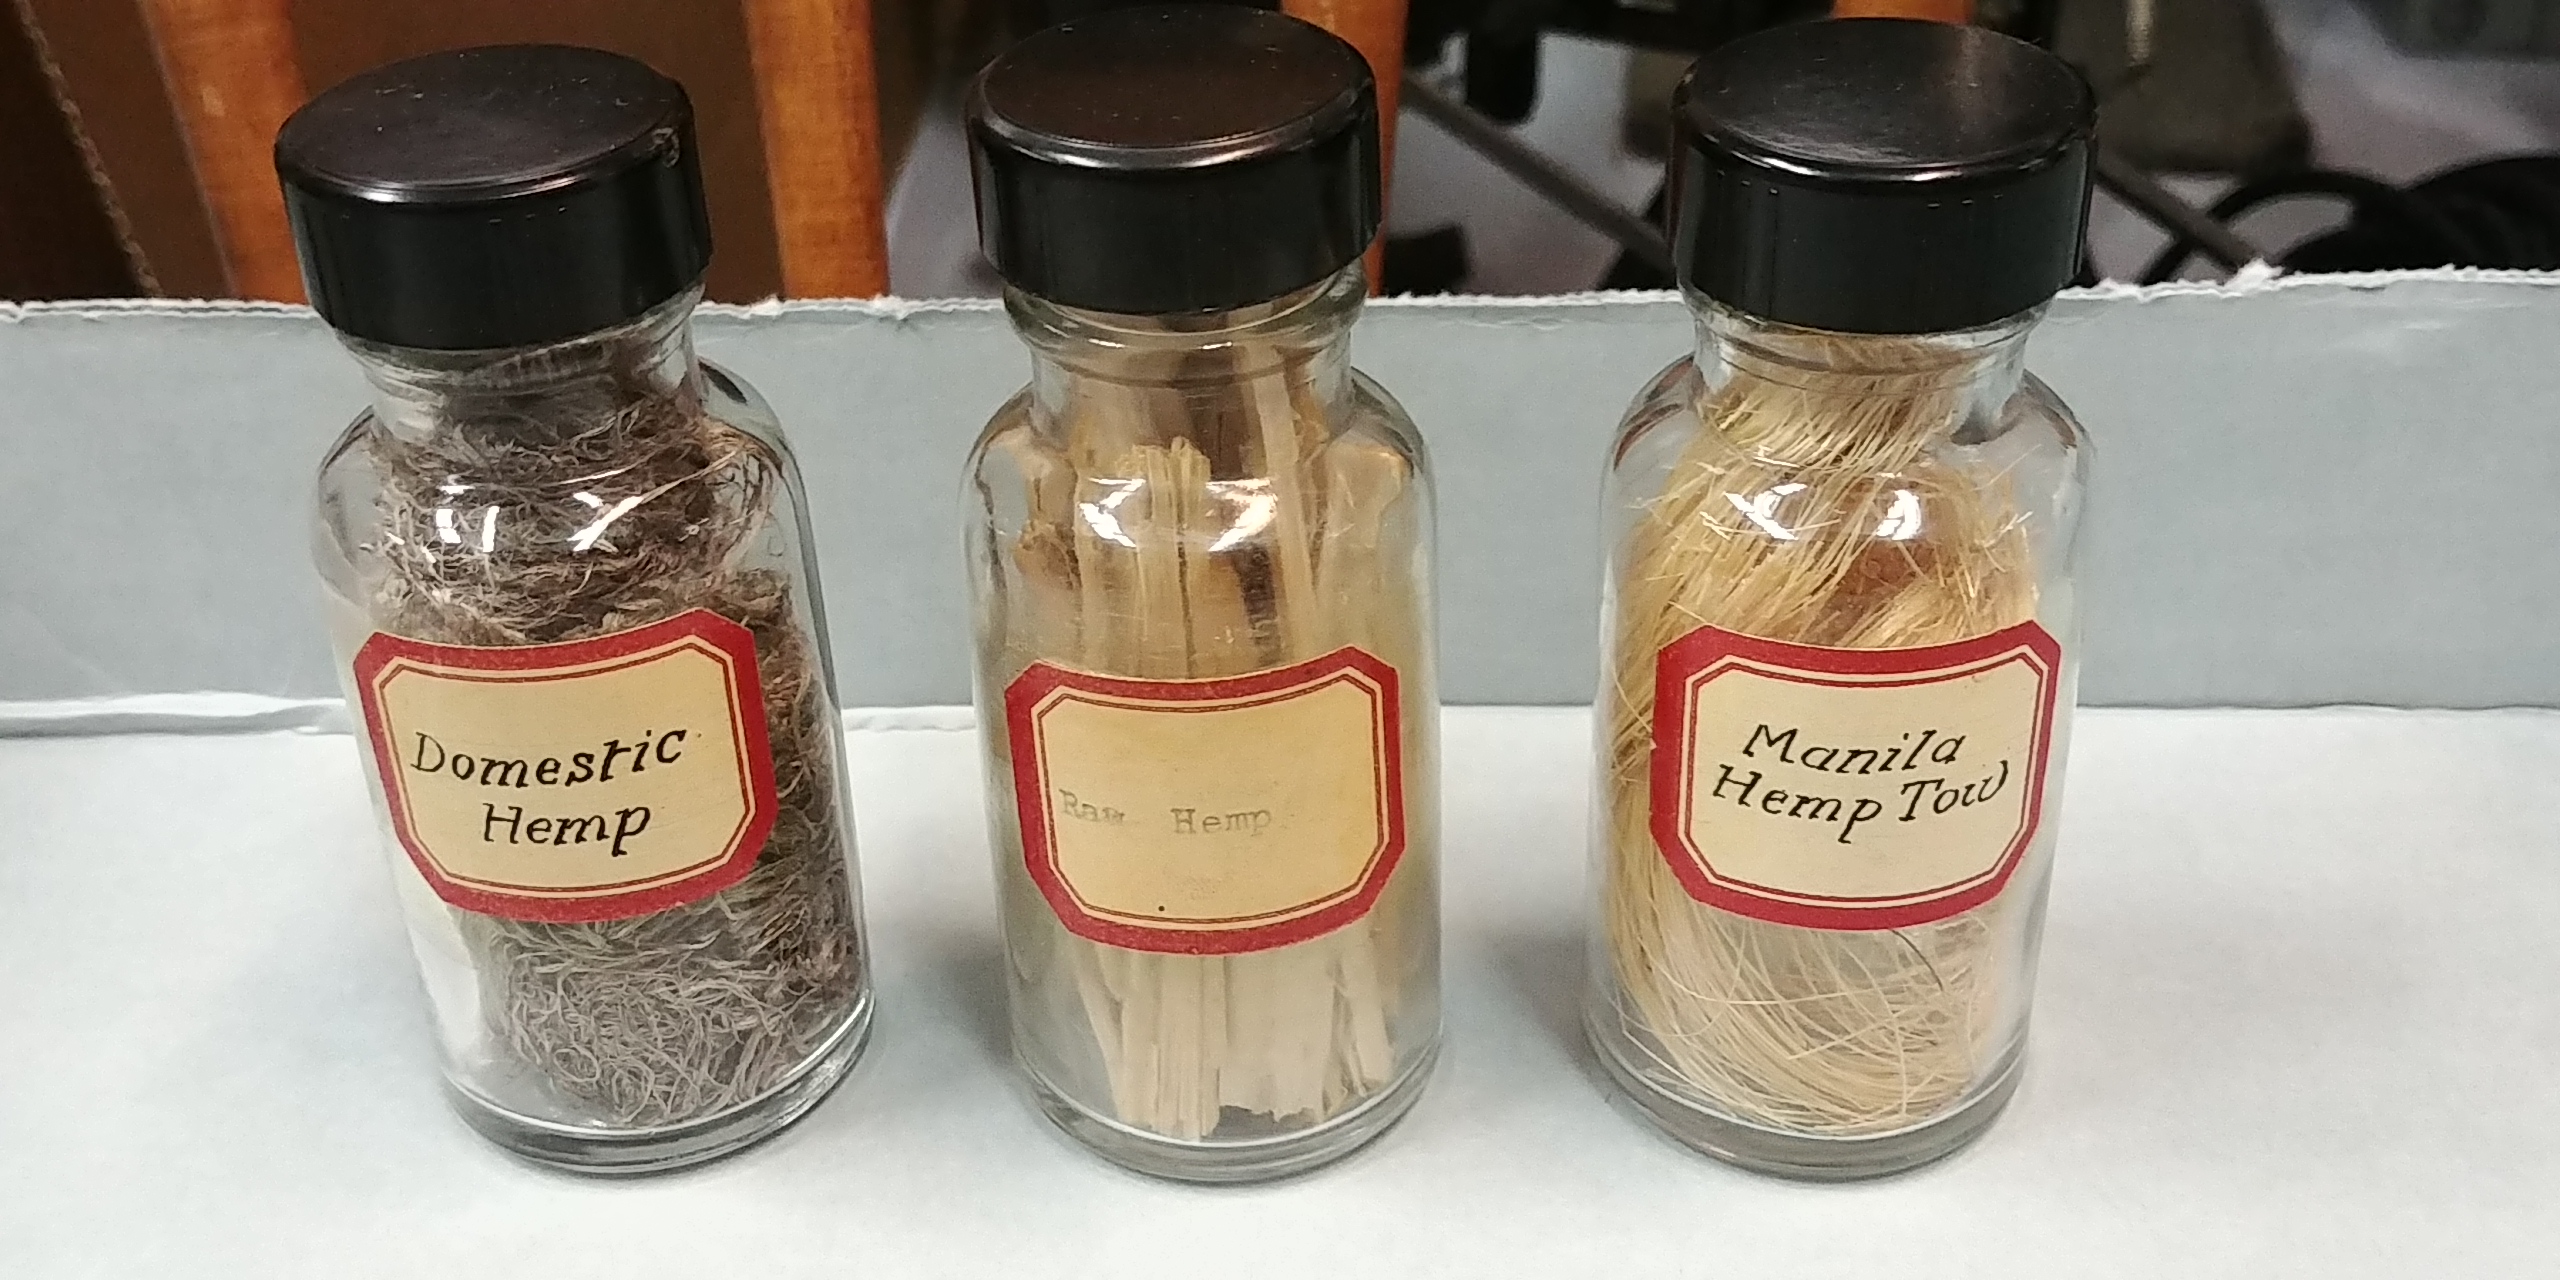 Three small glass bottles filled with dry hemp fibers used in papermaking. Each vile has a paper label and black cap. From left to right the labels read: Domestic Hemp, Raw Hemp, Manilla Hemp Tow.